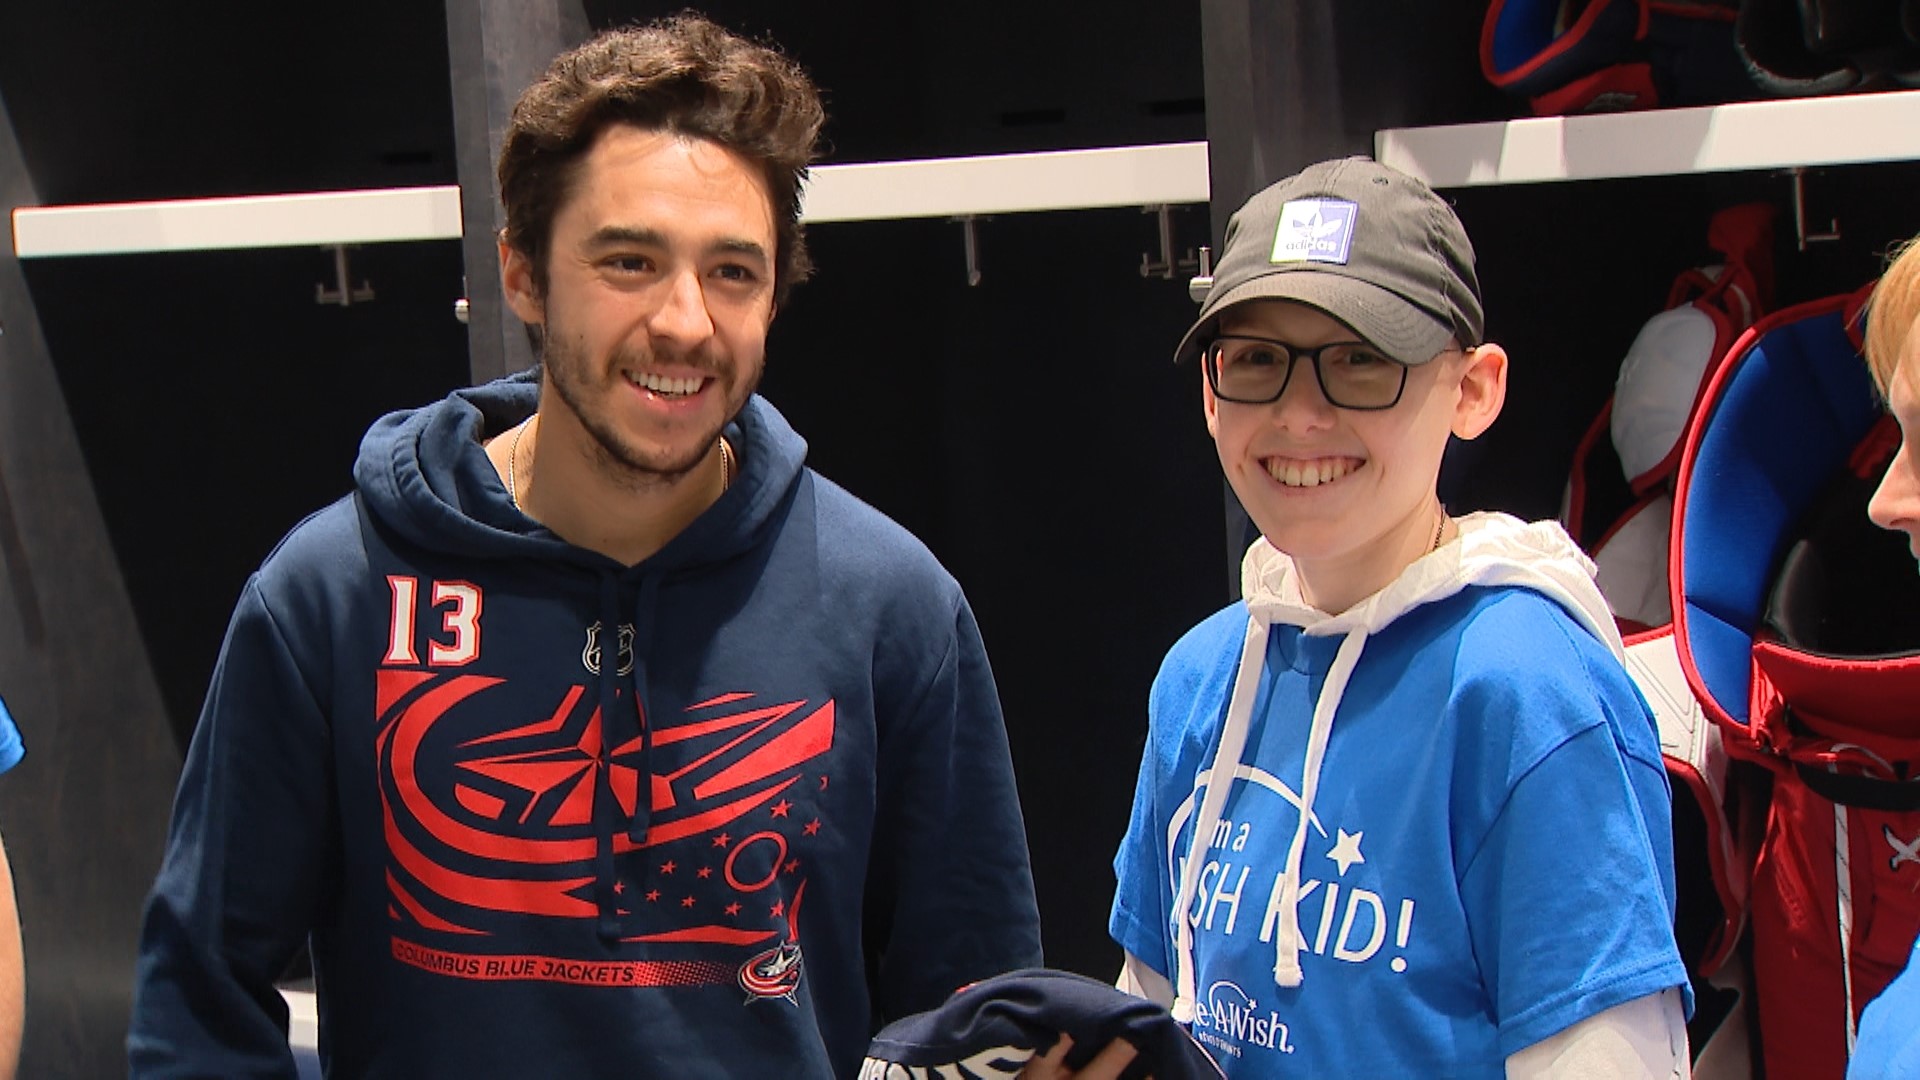 Alexandre and his family traveled from New Brunswick, Canada to Columbus, Ohio to spend the day with Johnny Gaudreau and the Blue Jackets team.